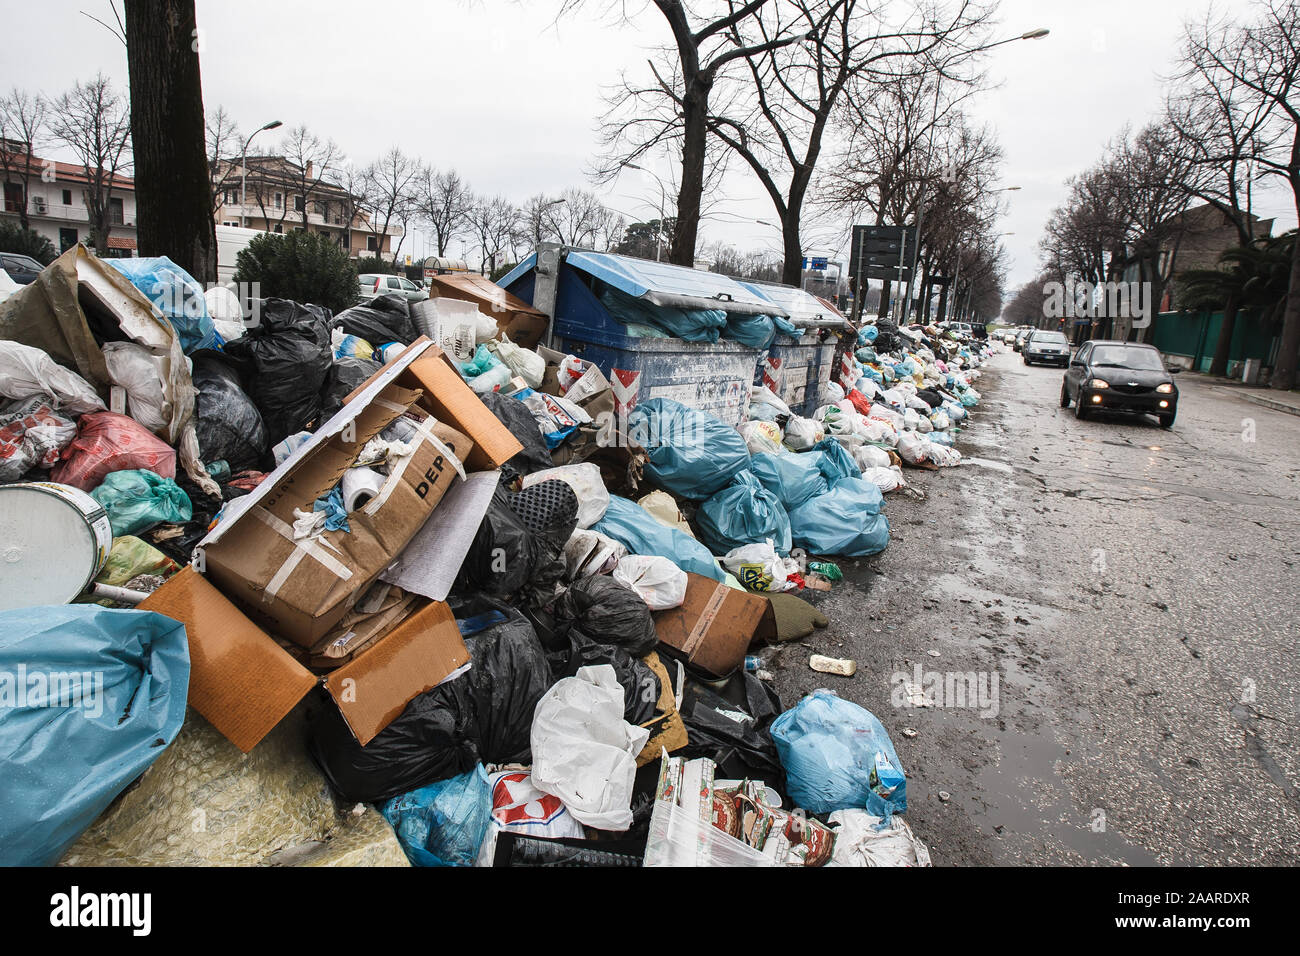 Caserta, Italy, February 21, 2008: Waste accumulates on a street in Caserta, Italy, north of Naples during the Naples waste management crisis in 2008. Stock Photo